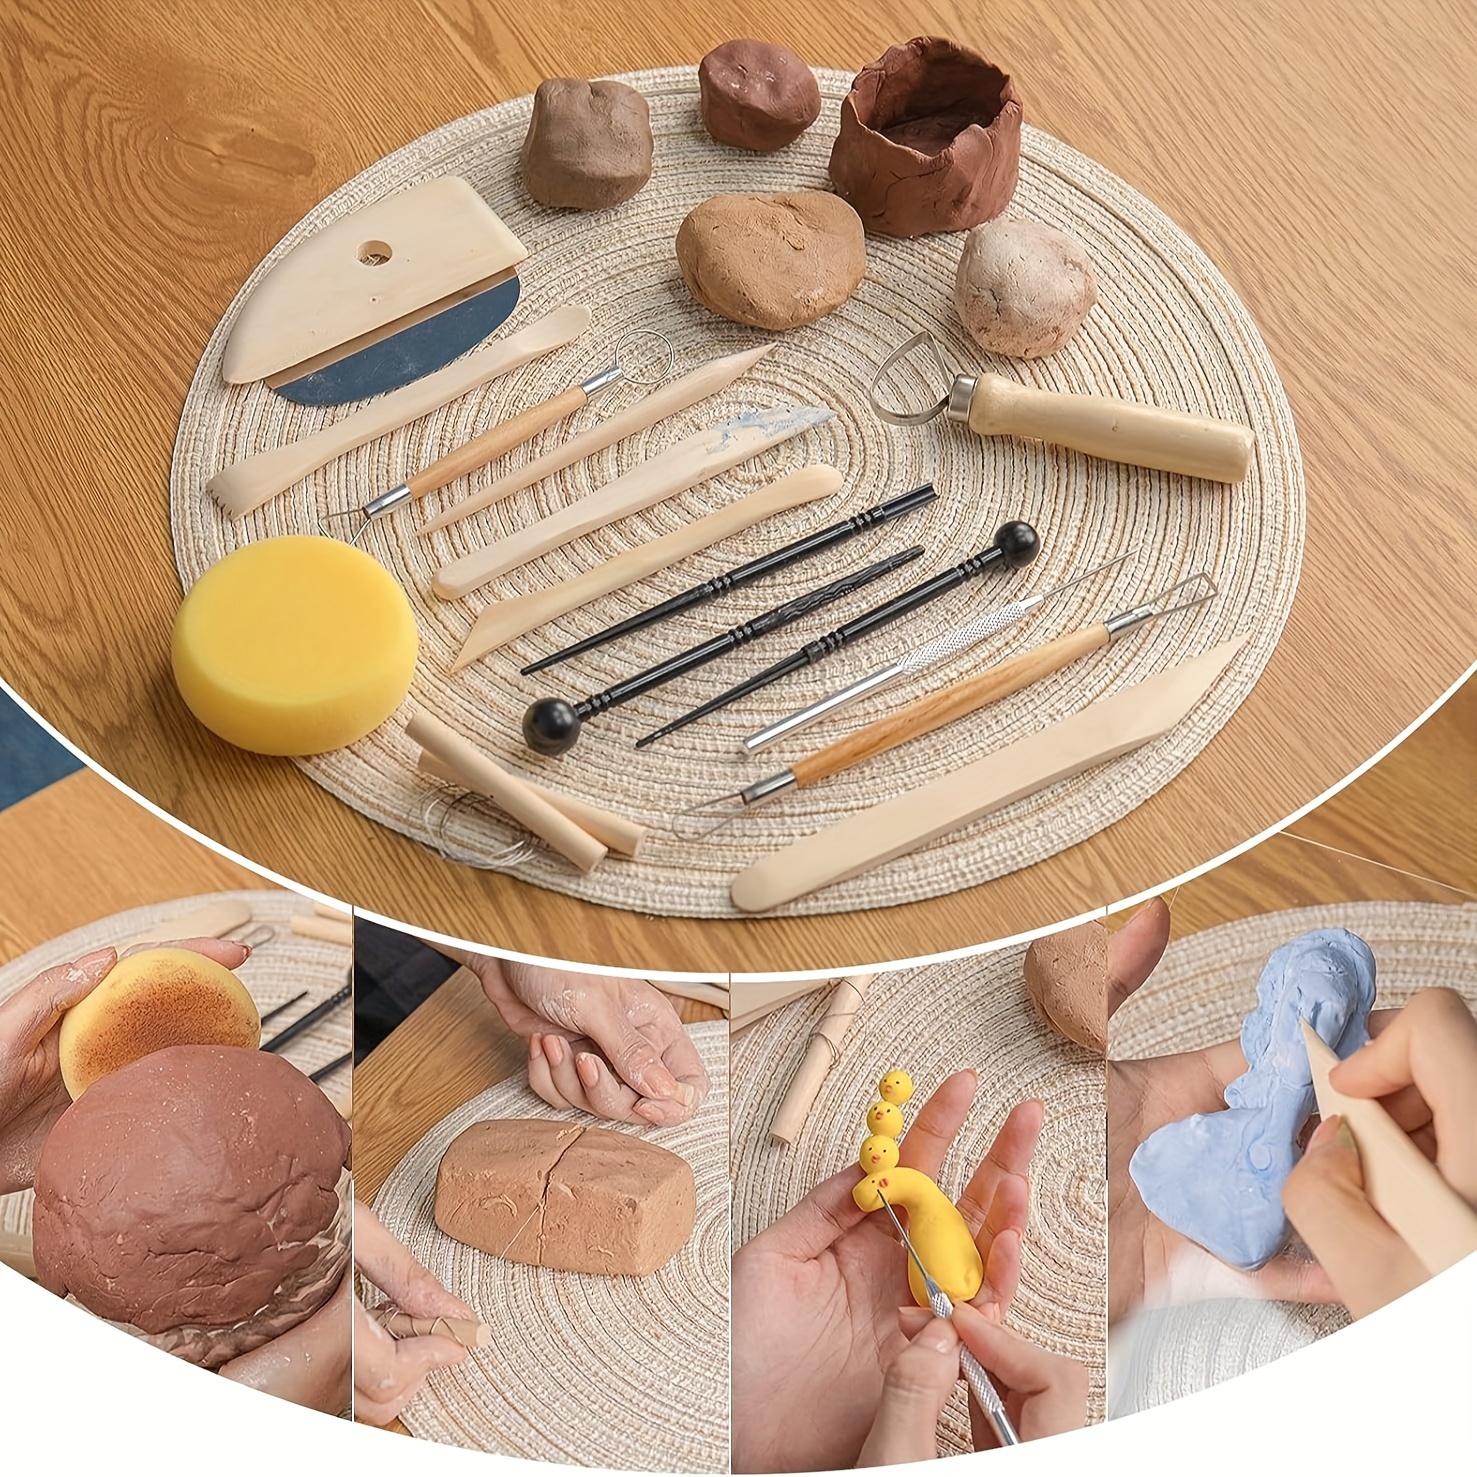  SEWACC 1 Set Clay Tools Stylus Dotting Tool Clay Modeling Tool  Ceramic Tool Pottery Carving Tool Kit DIY Tools Scraping Tool DIY Kits  Pottery Modeling Tools Ceramics Drilling Pen Wooden